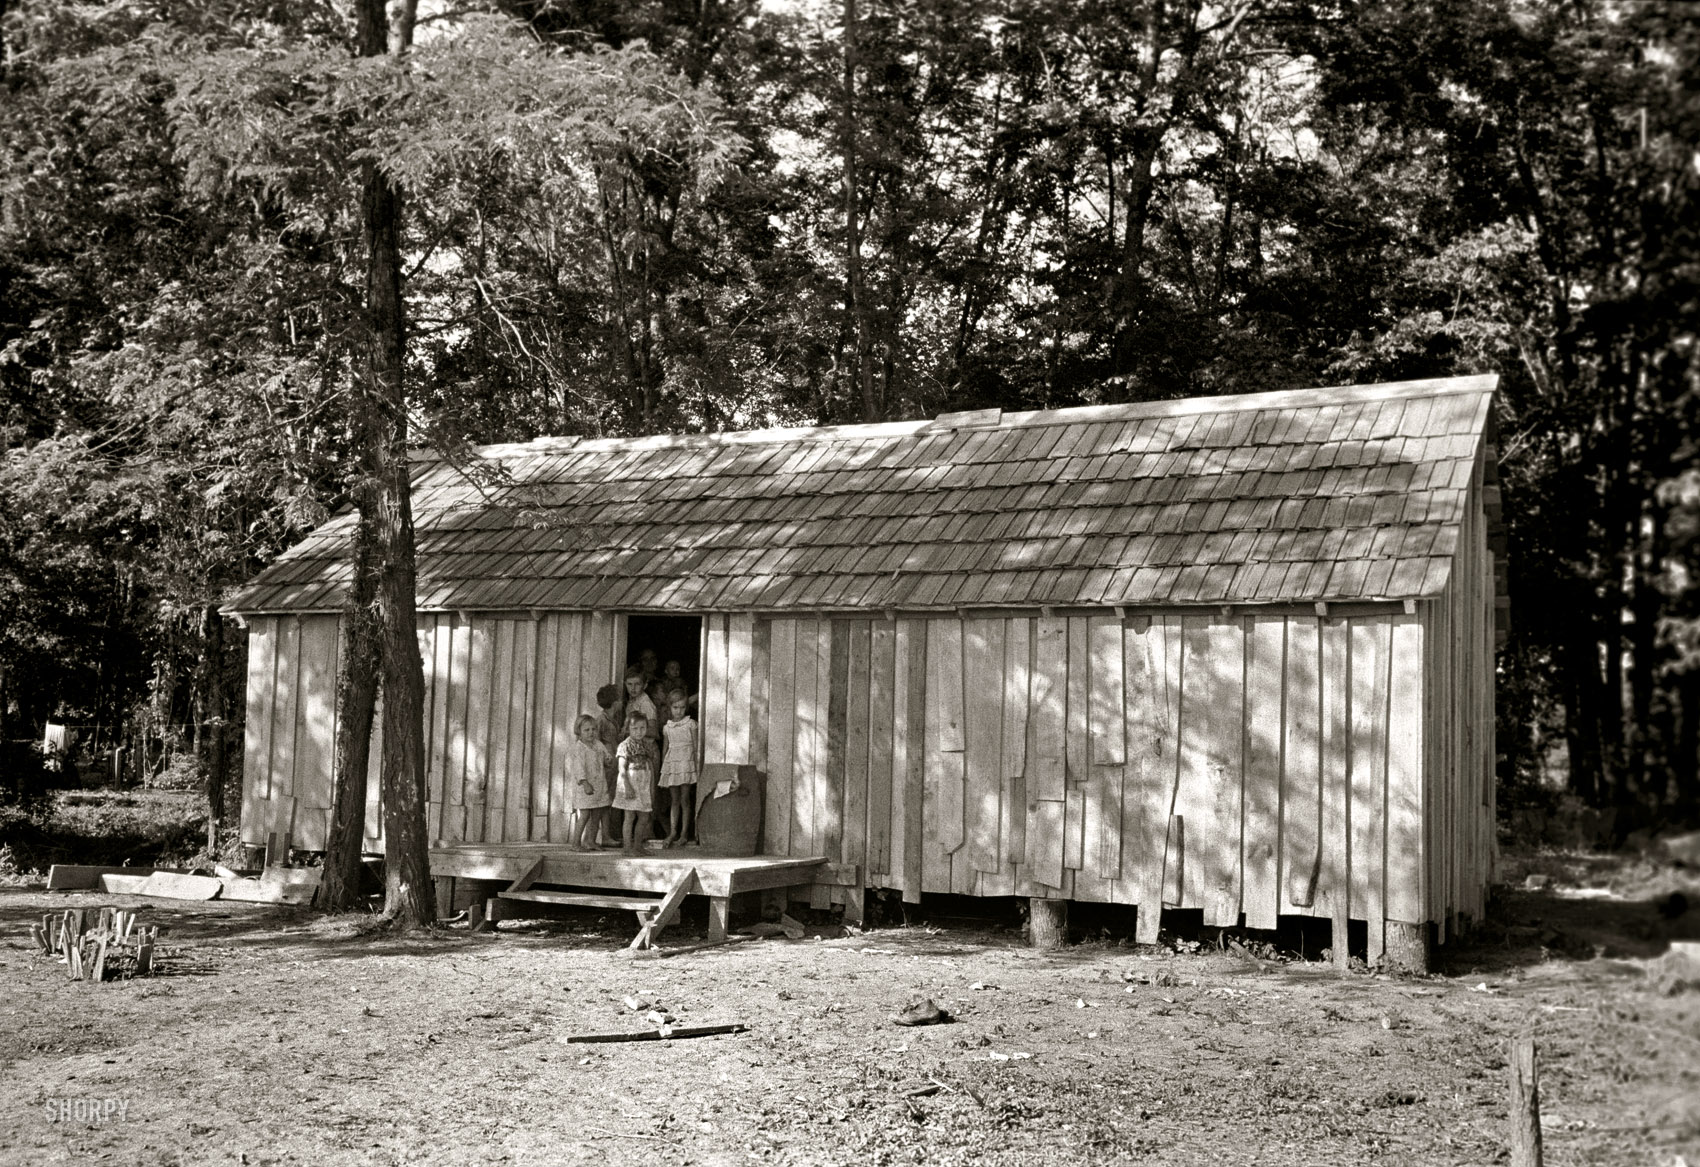 May 1938. New Madrid County, Missouri. "House without windows. Home of sharecropper cut-over farmers of Mississippi bottoms." 35mm nitrate negative by Russell Lee for the Farm Security Administration. View full size.